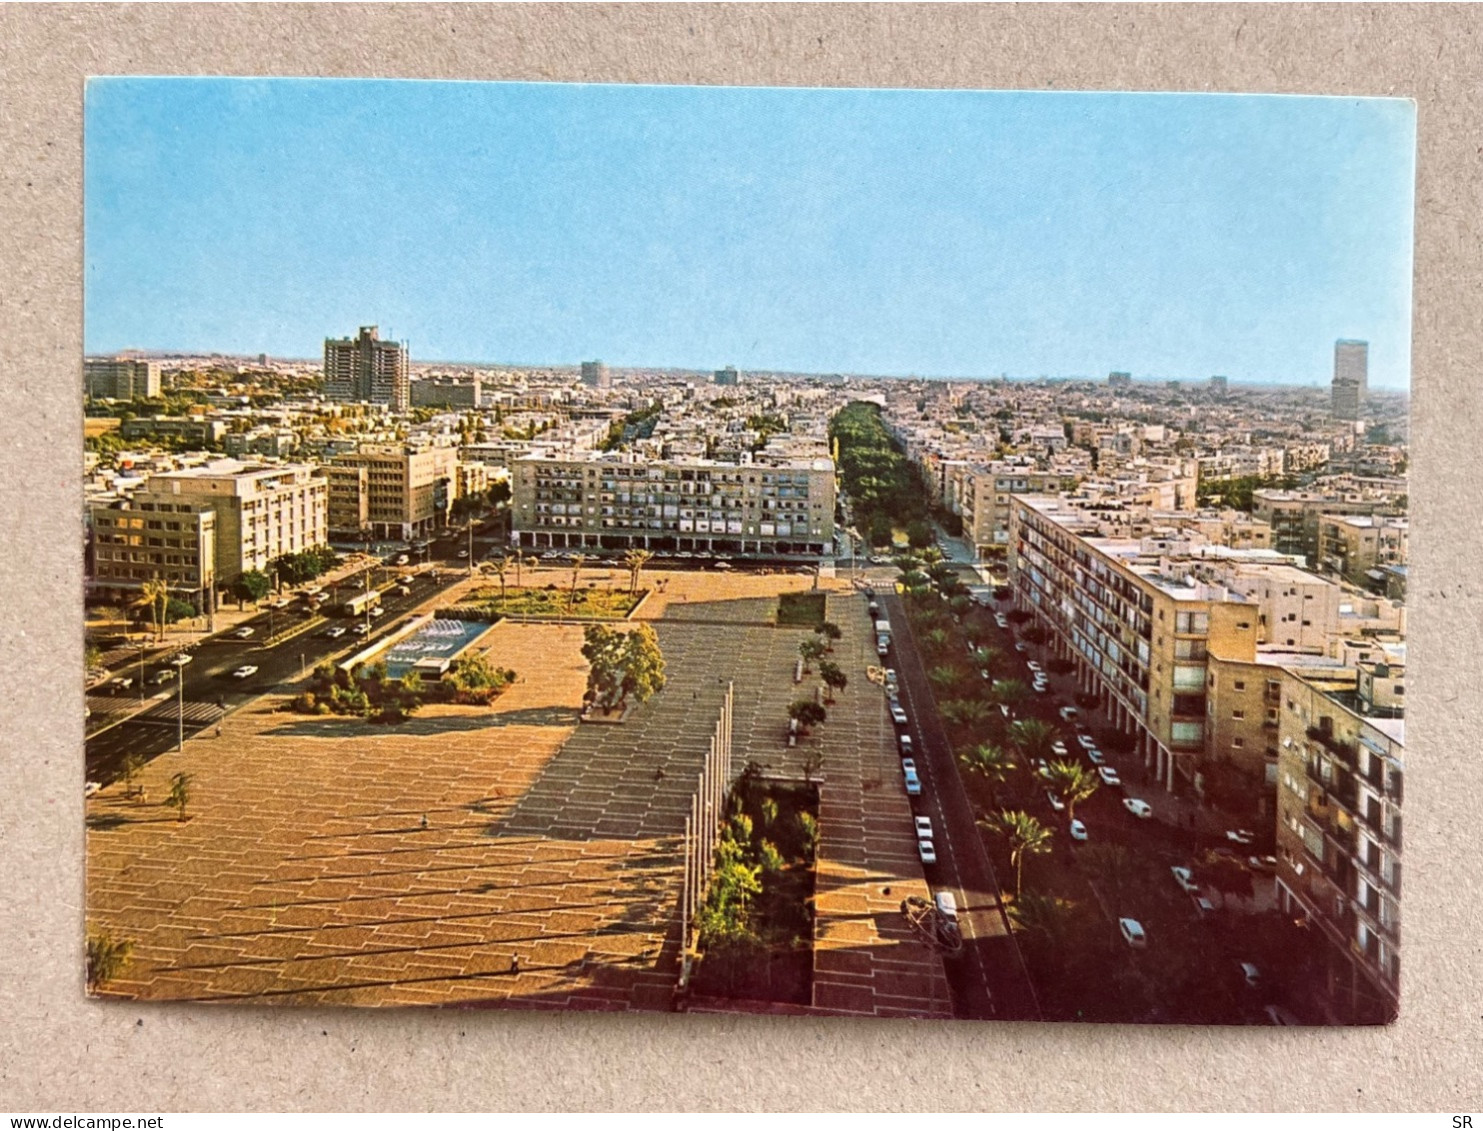 GEOGRAPHICAL POSTCARD - Kings Of Israel Square, Looking South From The Tel Aviv City Hall Building. Ibn Gvirol Street - Israel